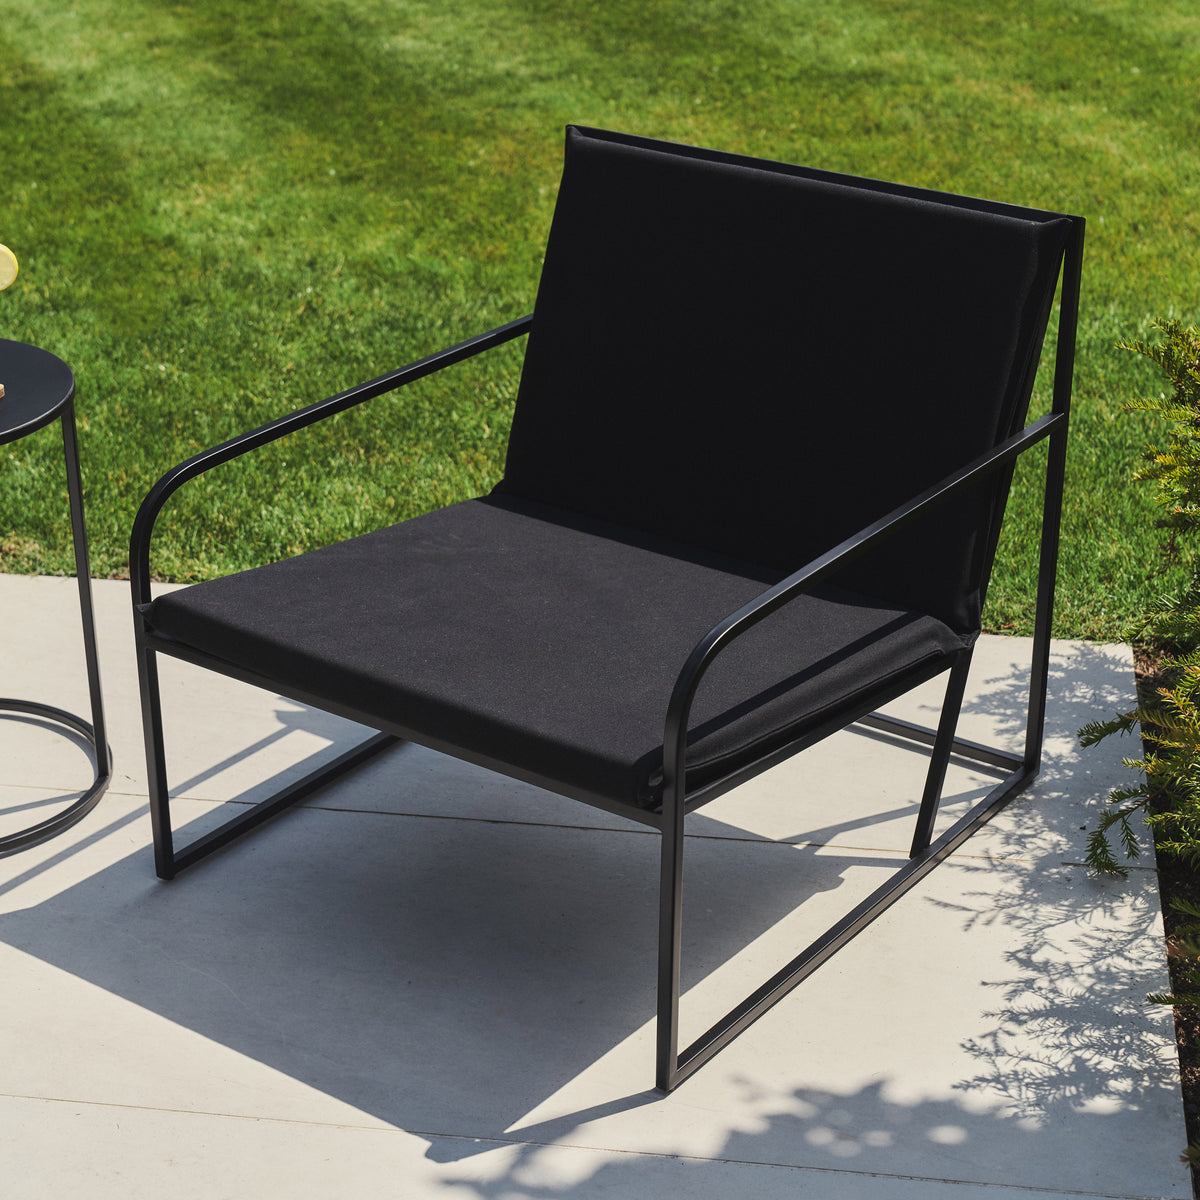 Rounded Black Modern Garden Chair in a typical setting